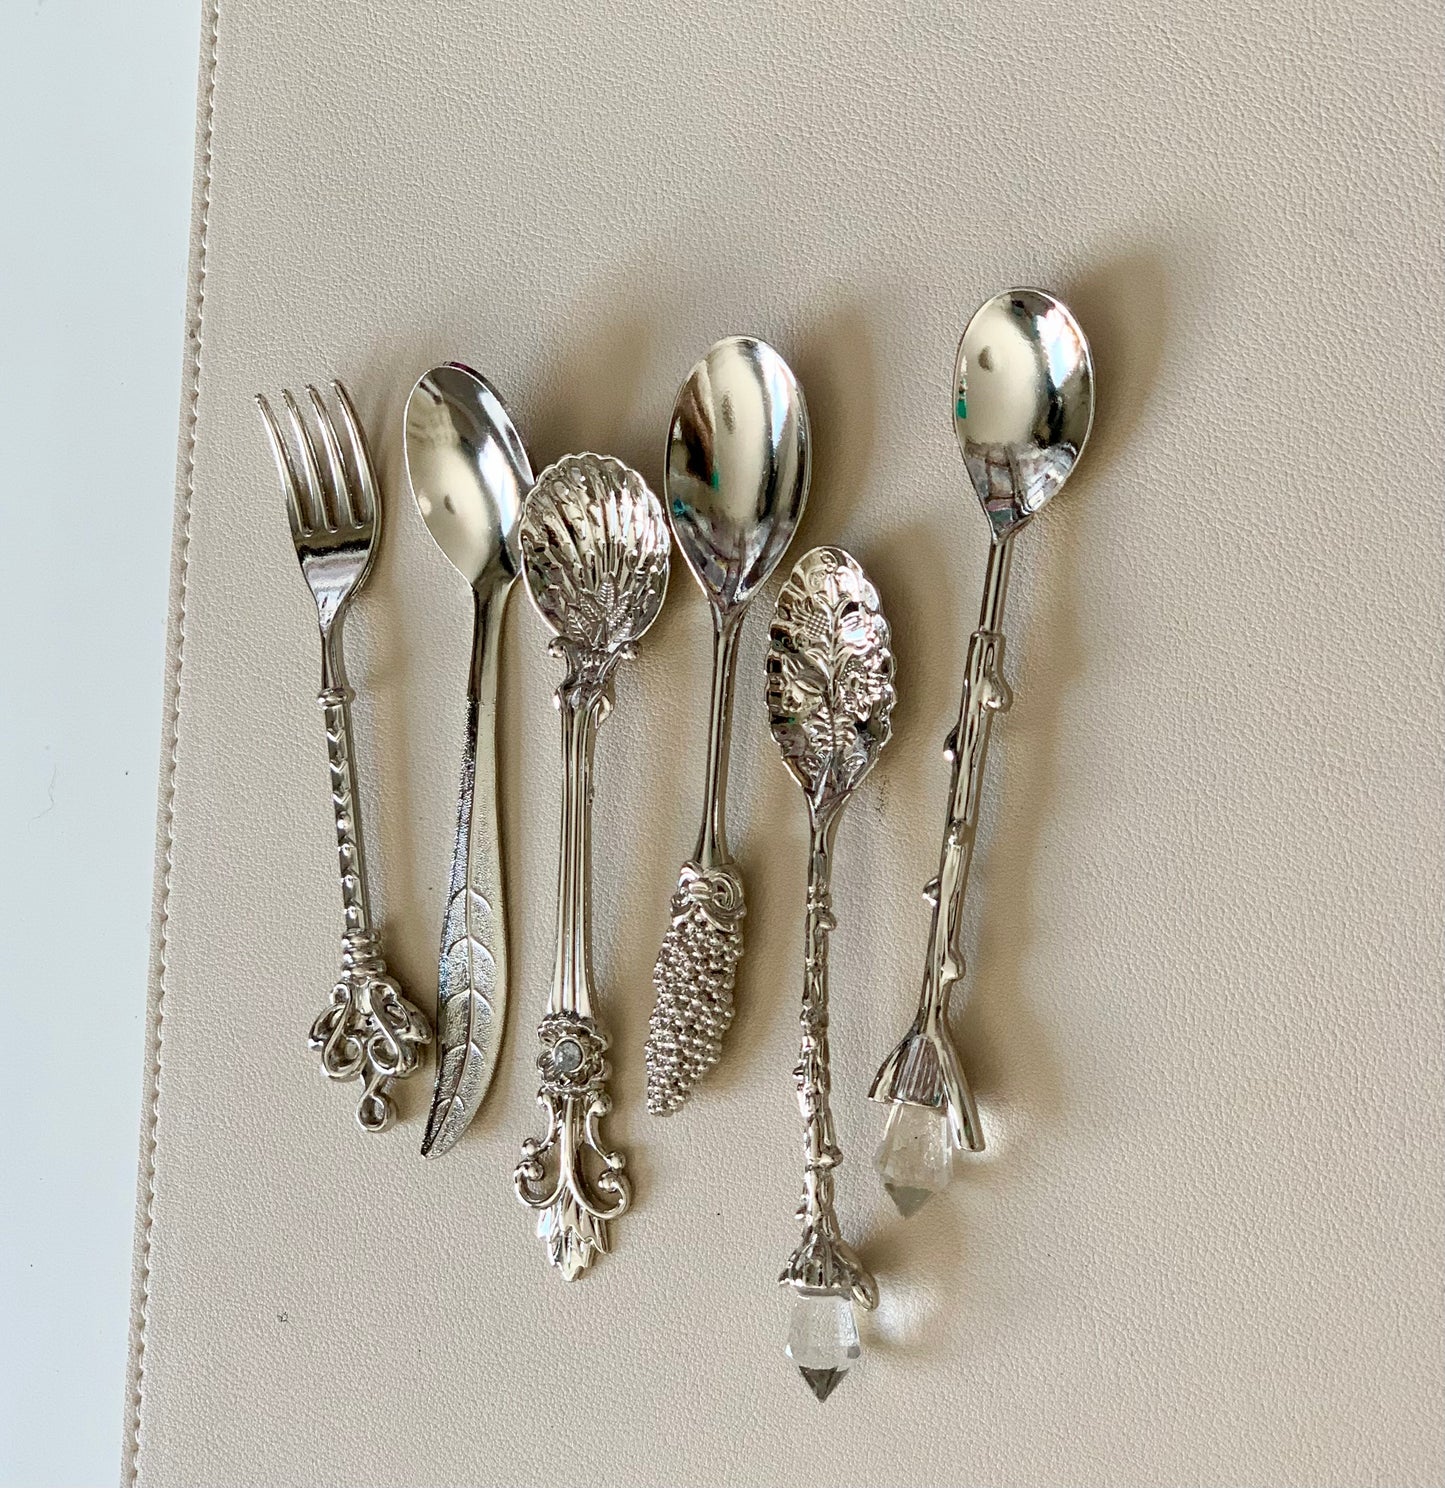 One Ornate Silver Spoon or Fork